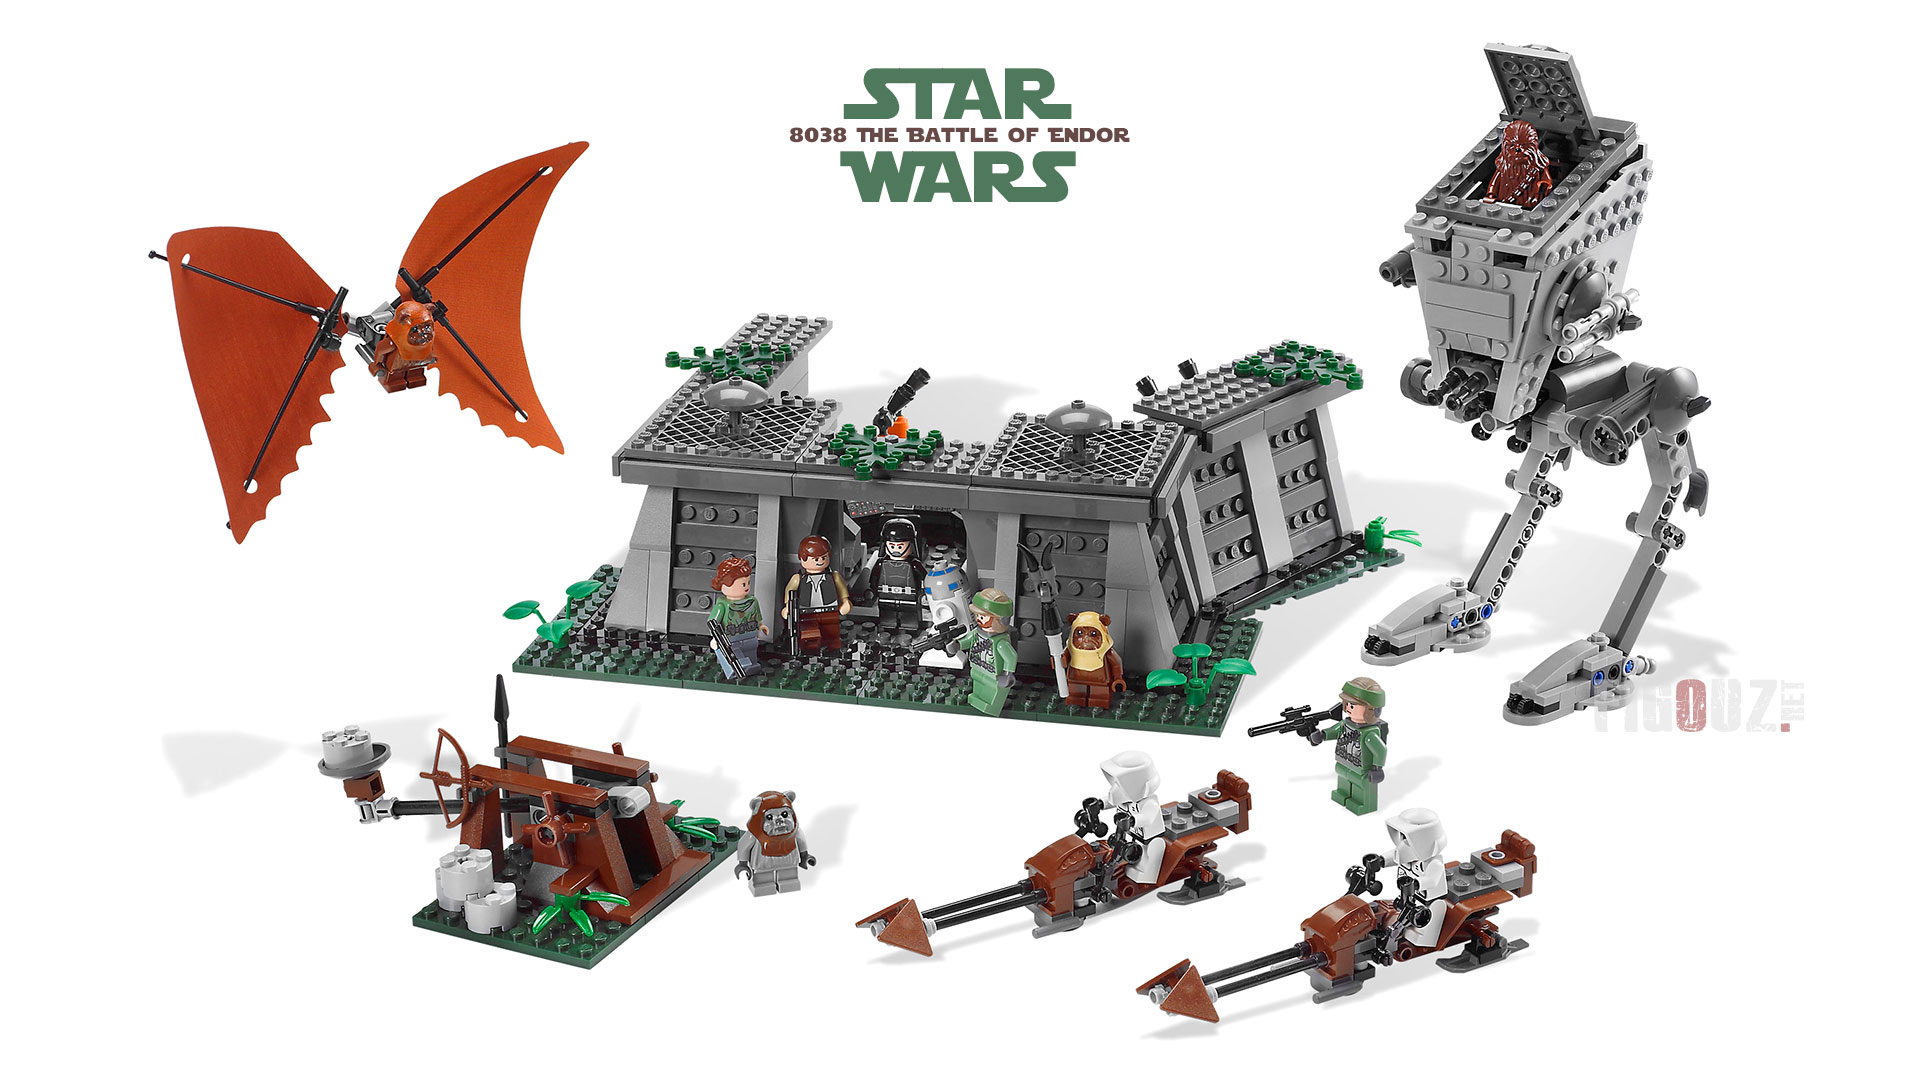 Lego Star Wars 8038 The Battle of Endor Anniversary Edition